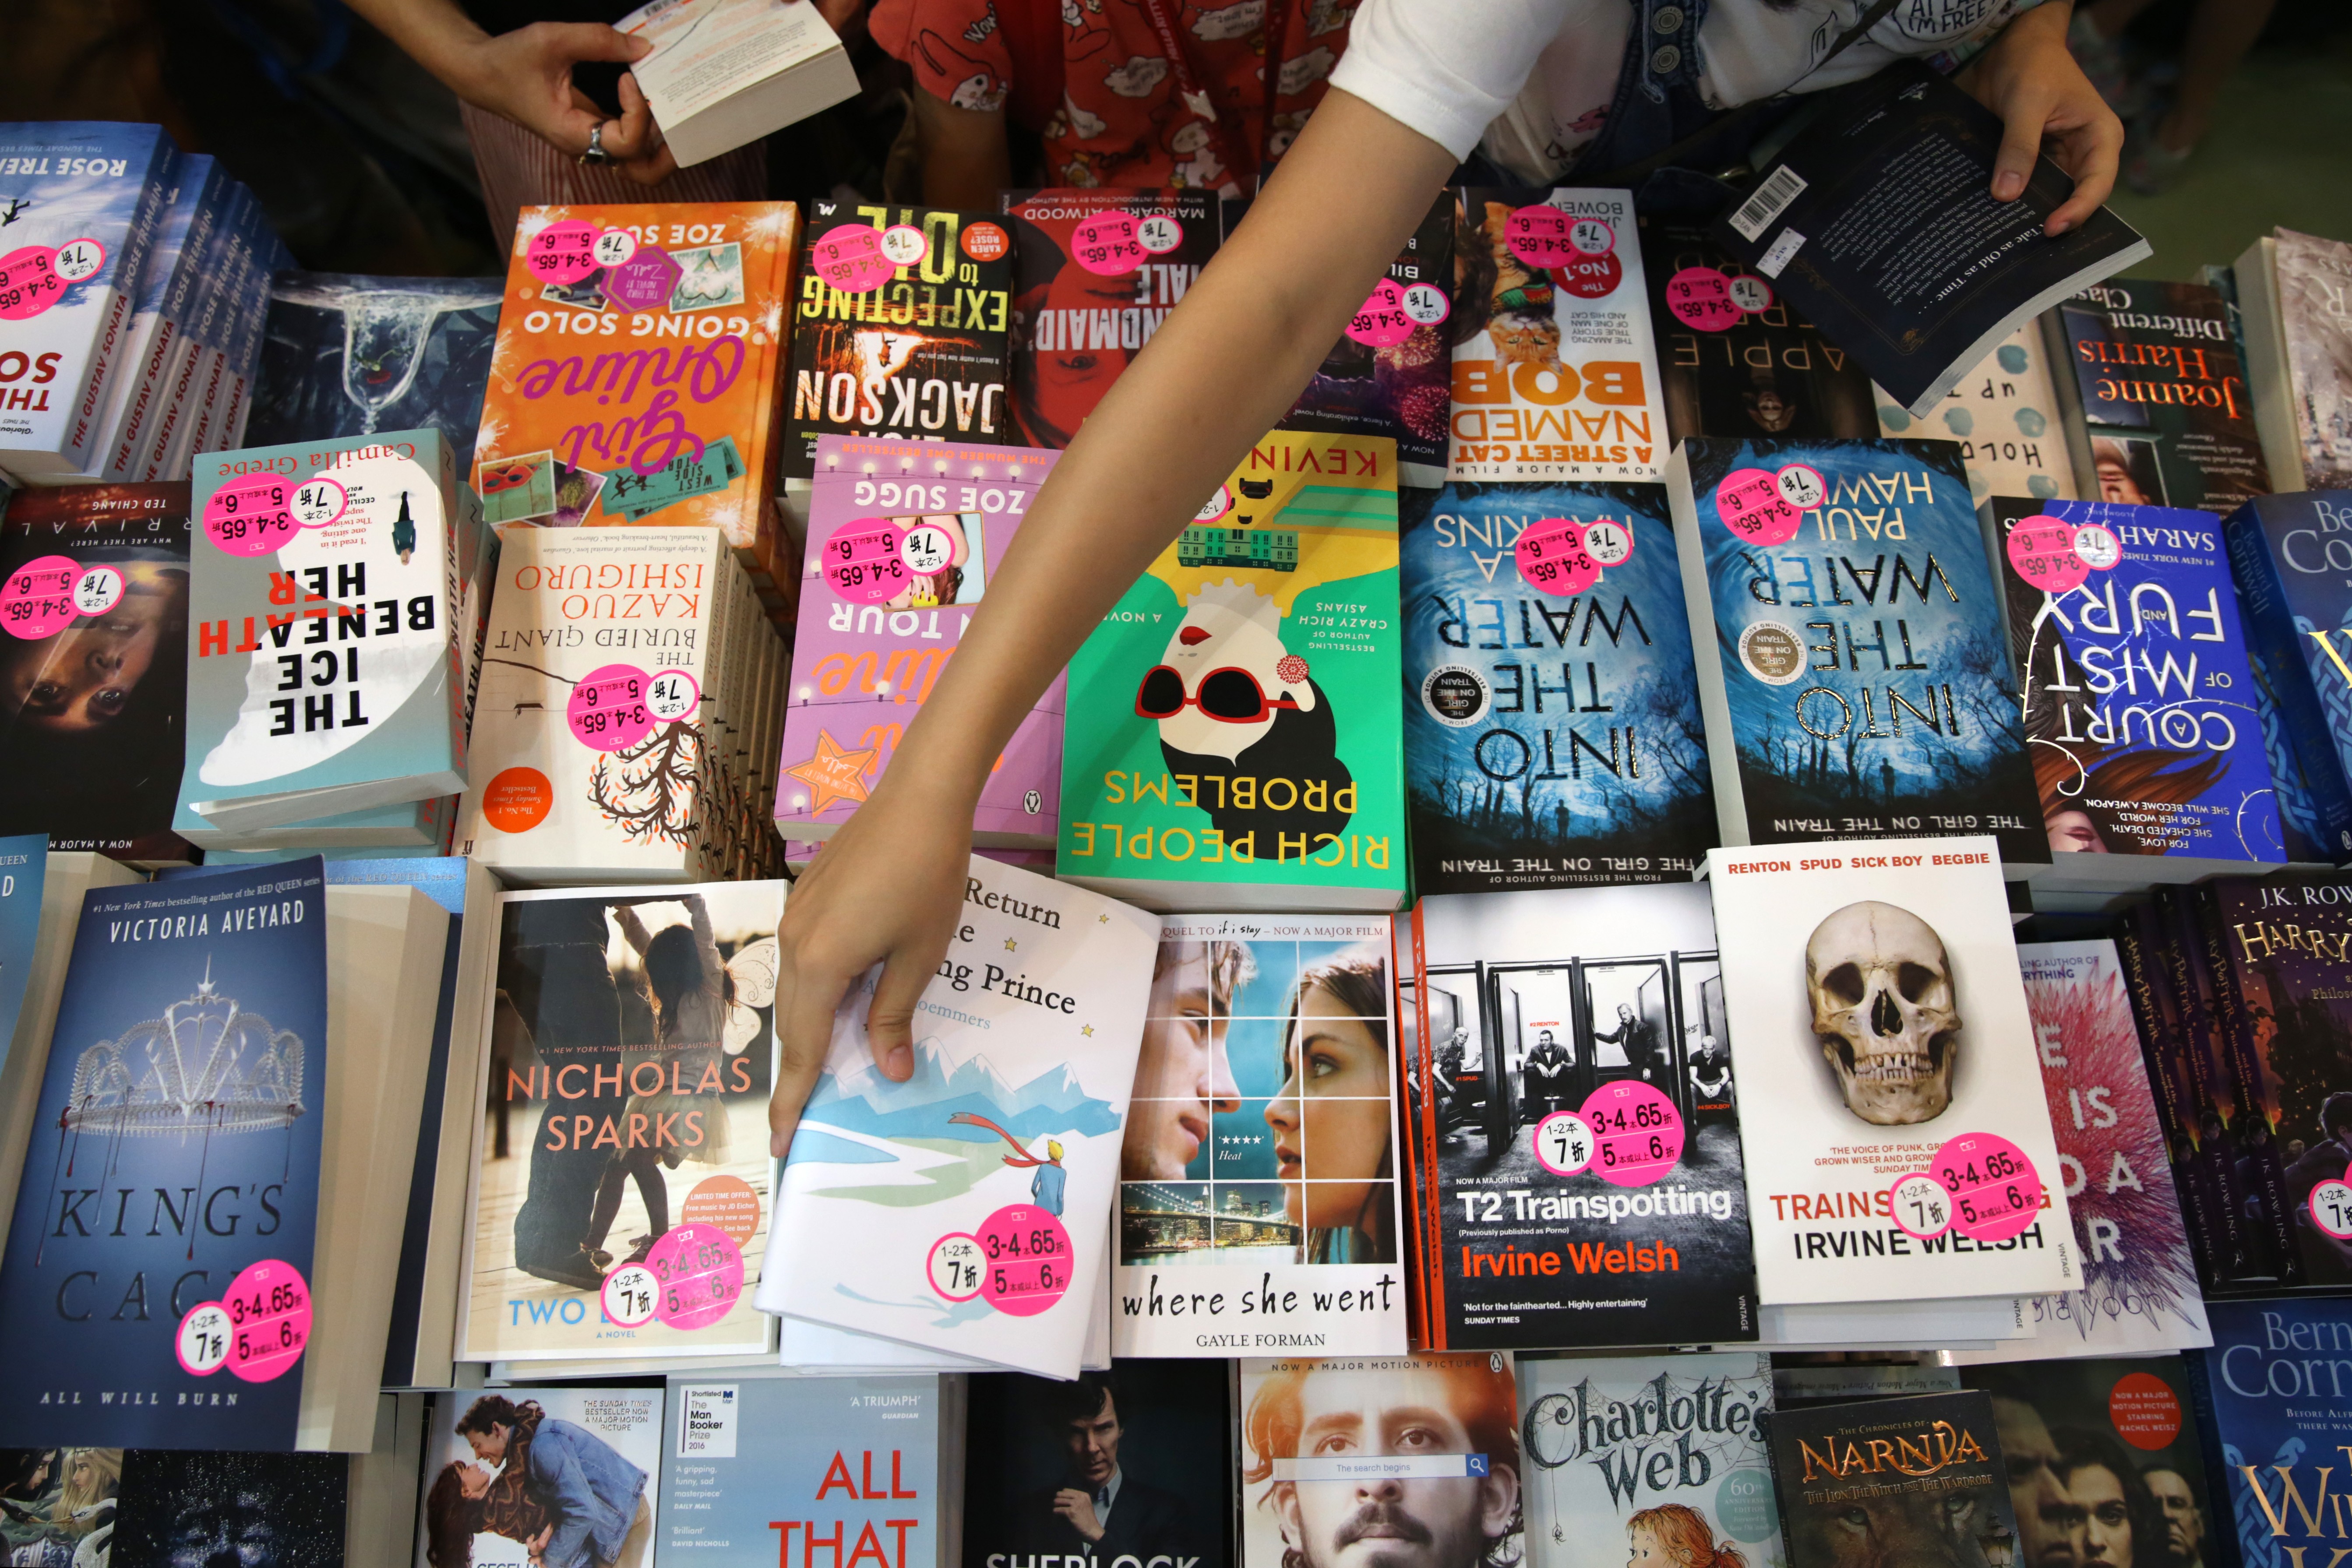 English-language novels on sale at the Hong Kong Book Fair last year. Over the years, there has been no lack of commentary on the falling standards of English in Hong Kong. Photo: Sam Tsang